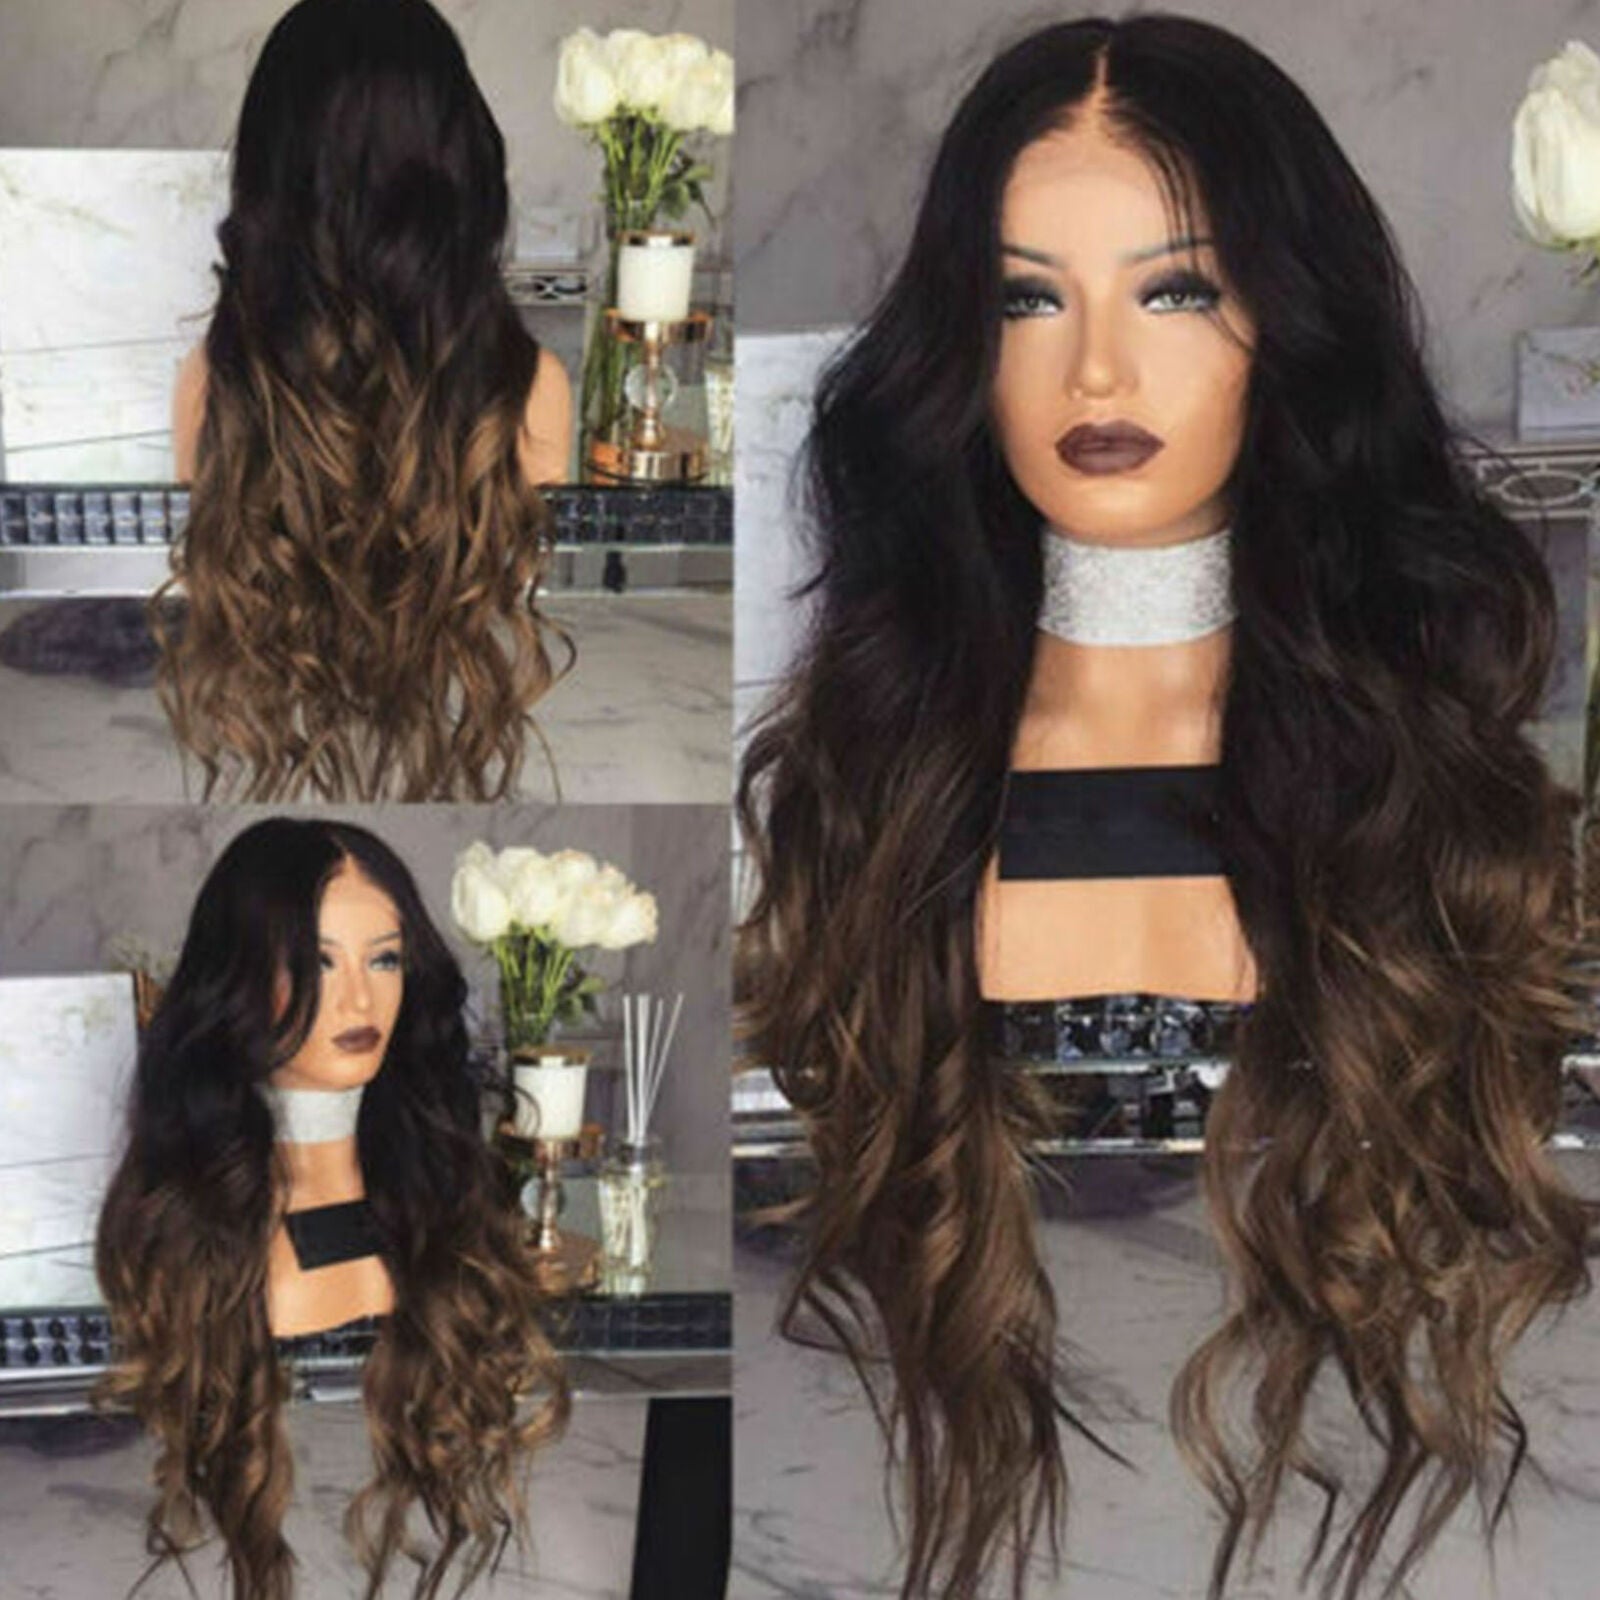 Stylish Long Wavy Wigs Black Brown Ombre Synthetic Full Curly Hair For Women